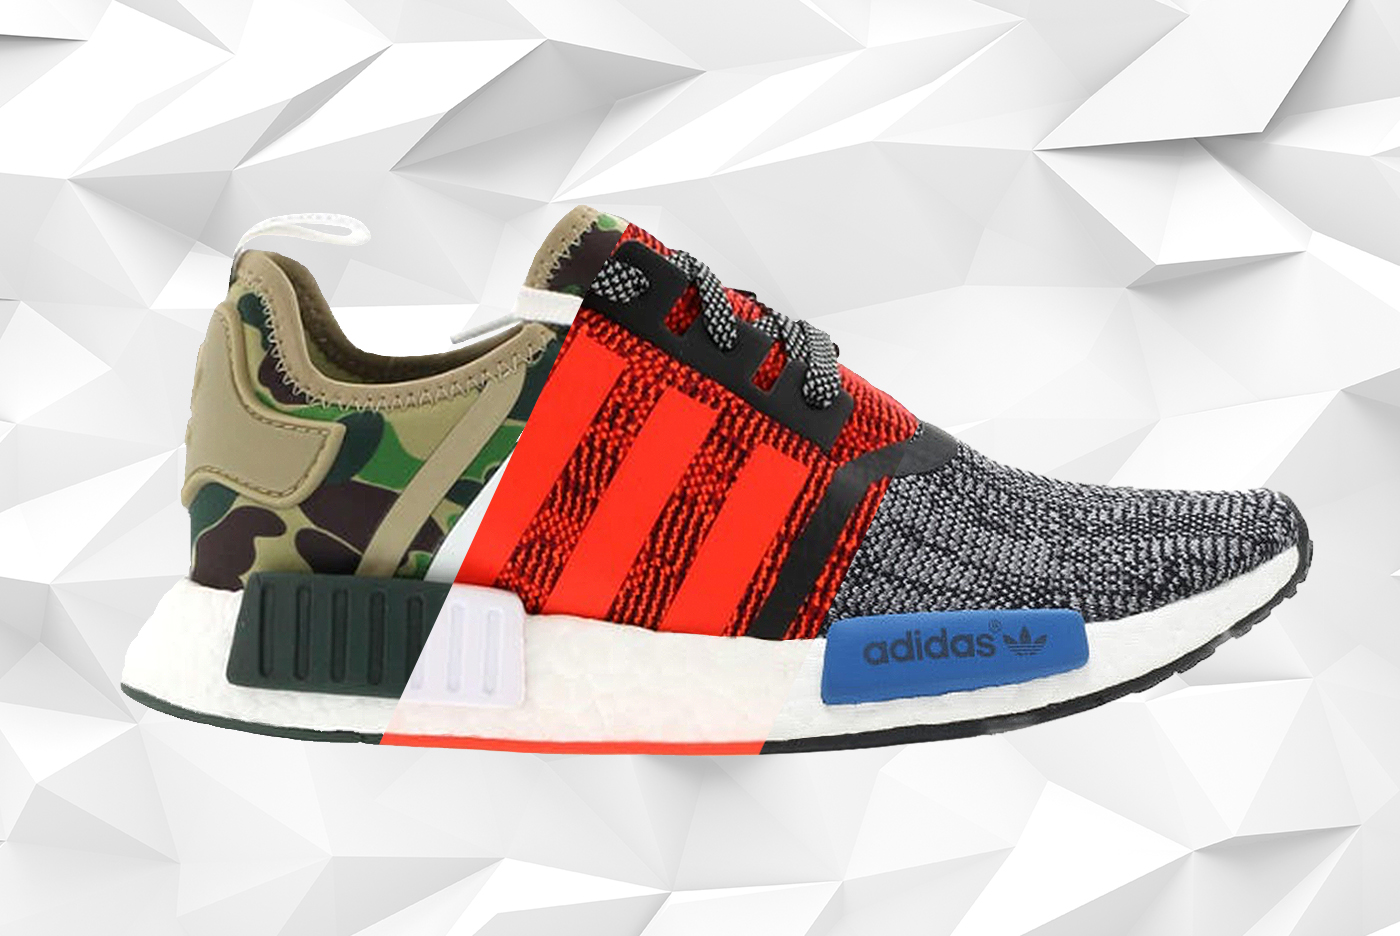 10 Expensive adidas NMD Sneakers - StockX News